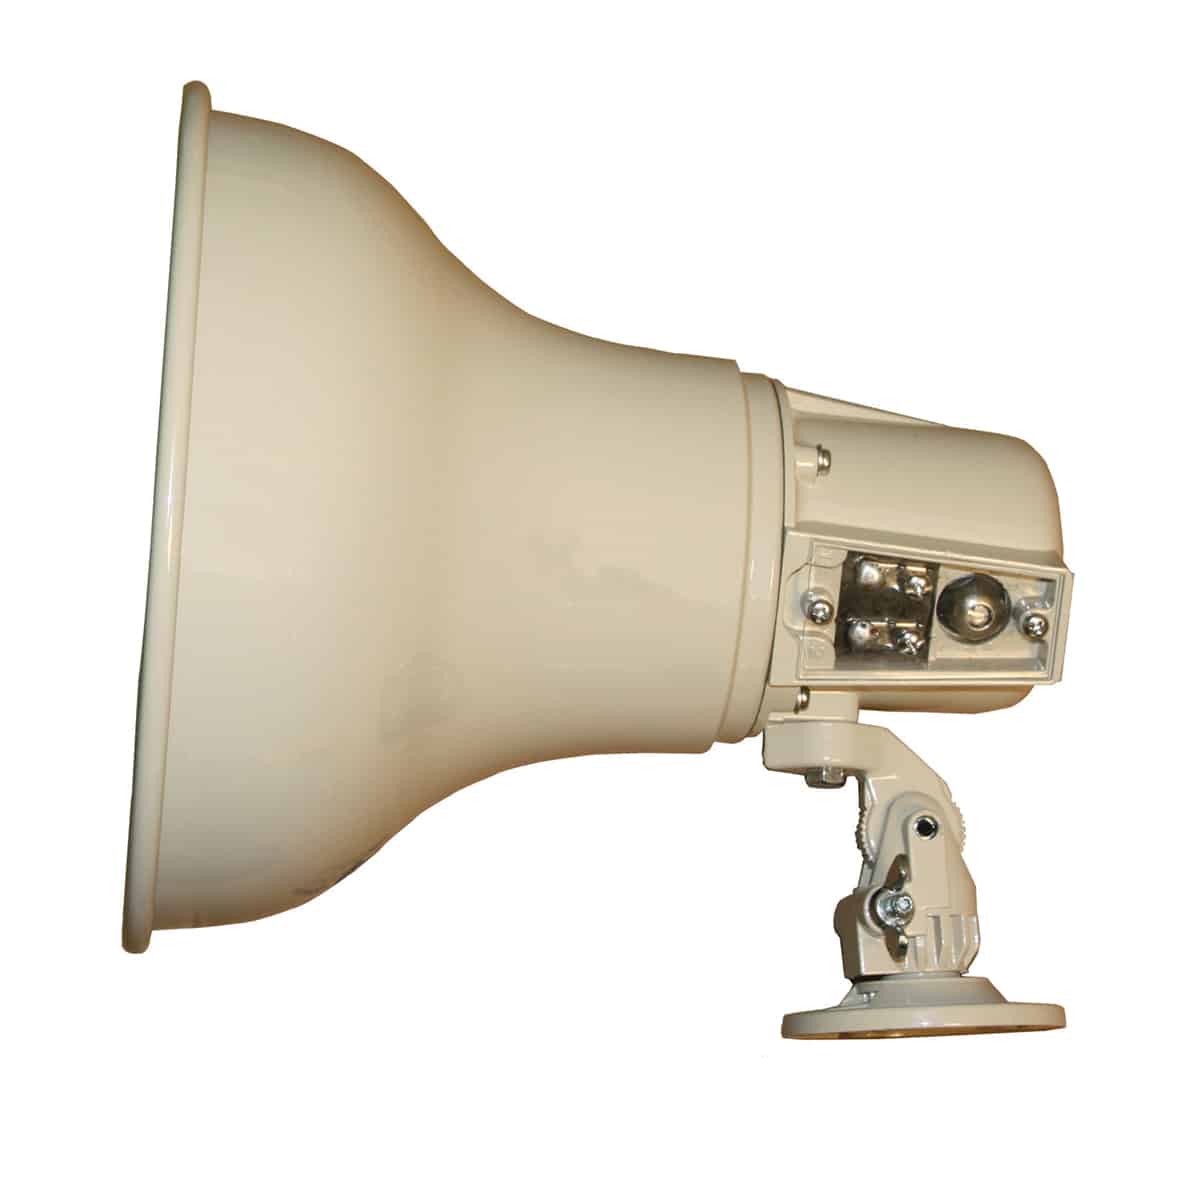 Lowell LH-15TA 15W Re-entrant Paging Horn, side